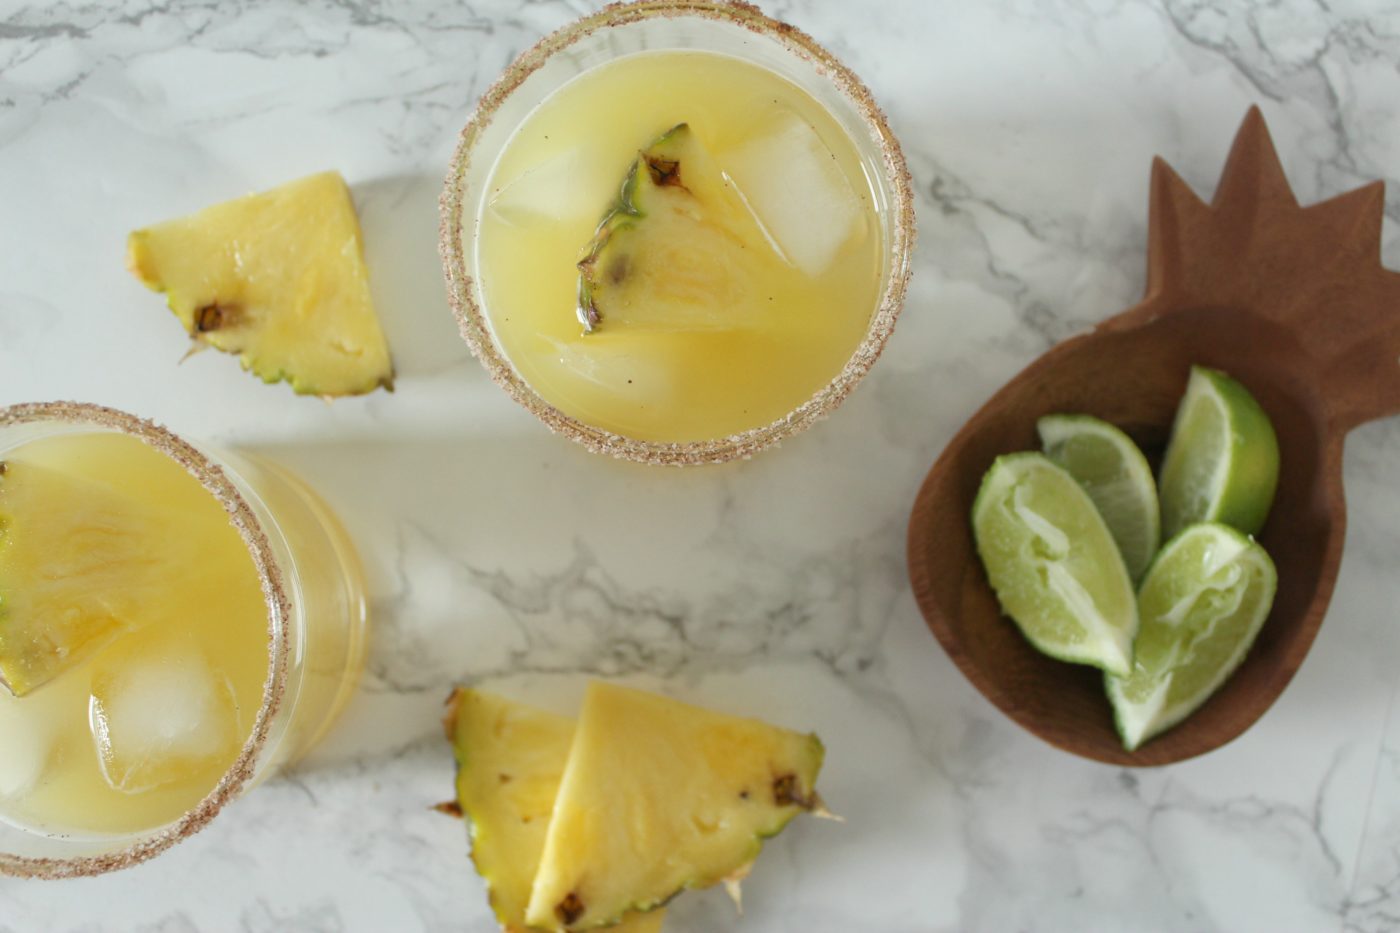 Be sure to garnish your pineapple cinnamon margarita with fresh pineapples. Not only is it beautiful but the pineapple is delicious to eat after you've finished your drink.